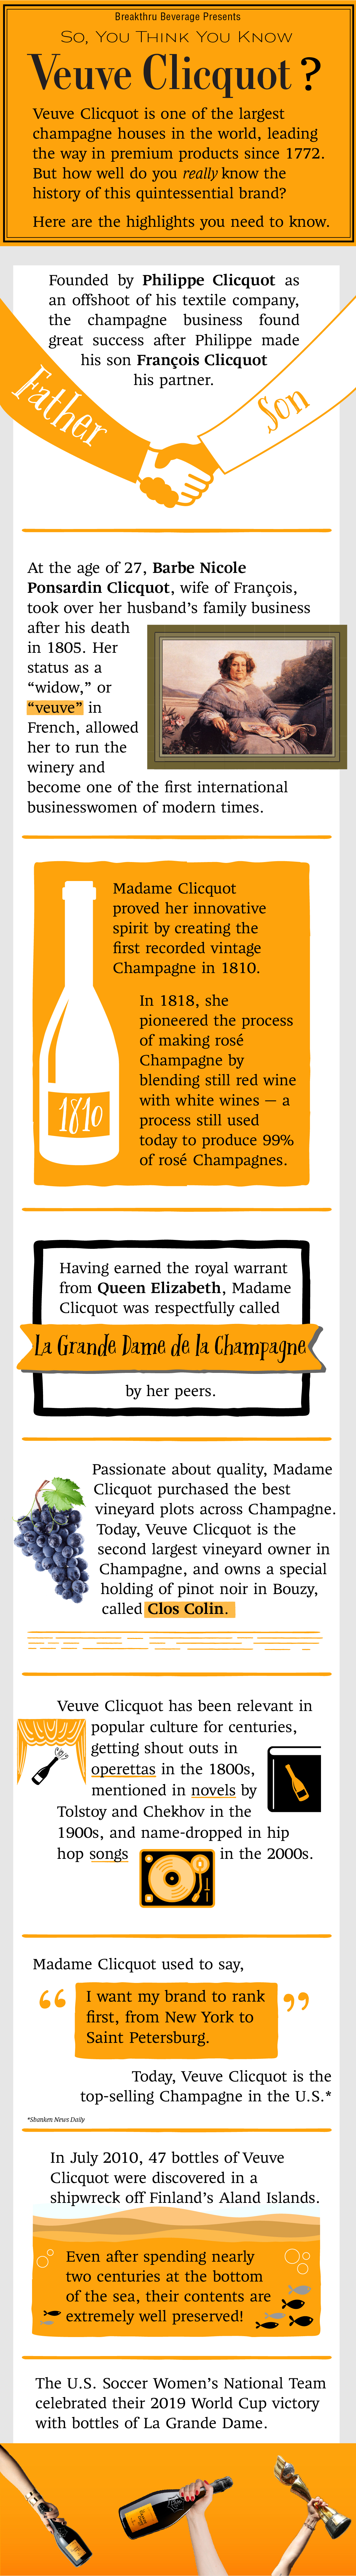 So, You Think You Know Veuve Clicquot?